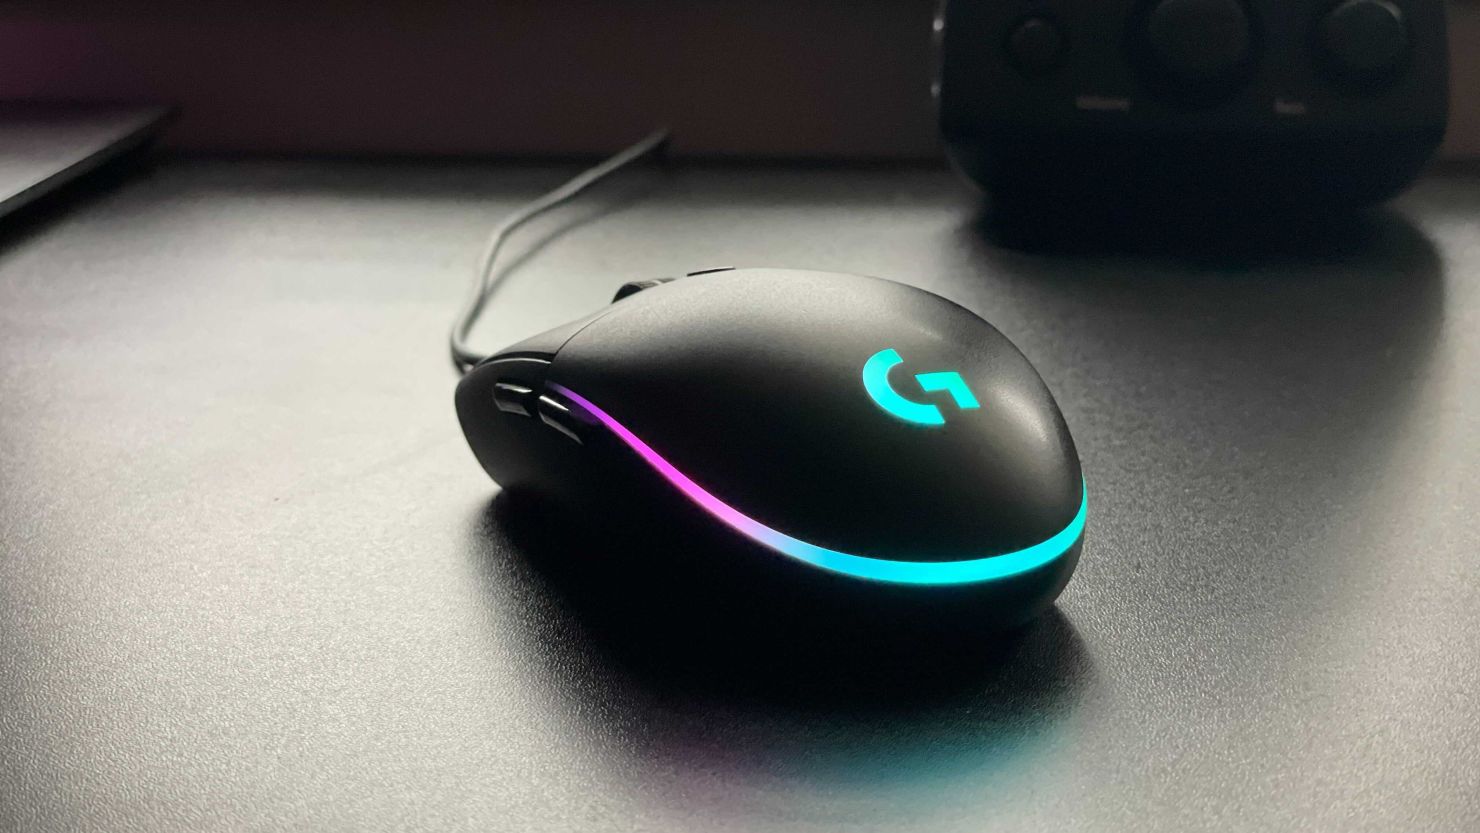 Logitech G203 Lightsync review: a great budget gaming mouse